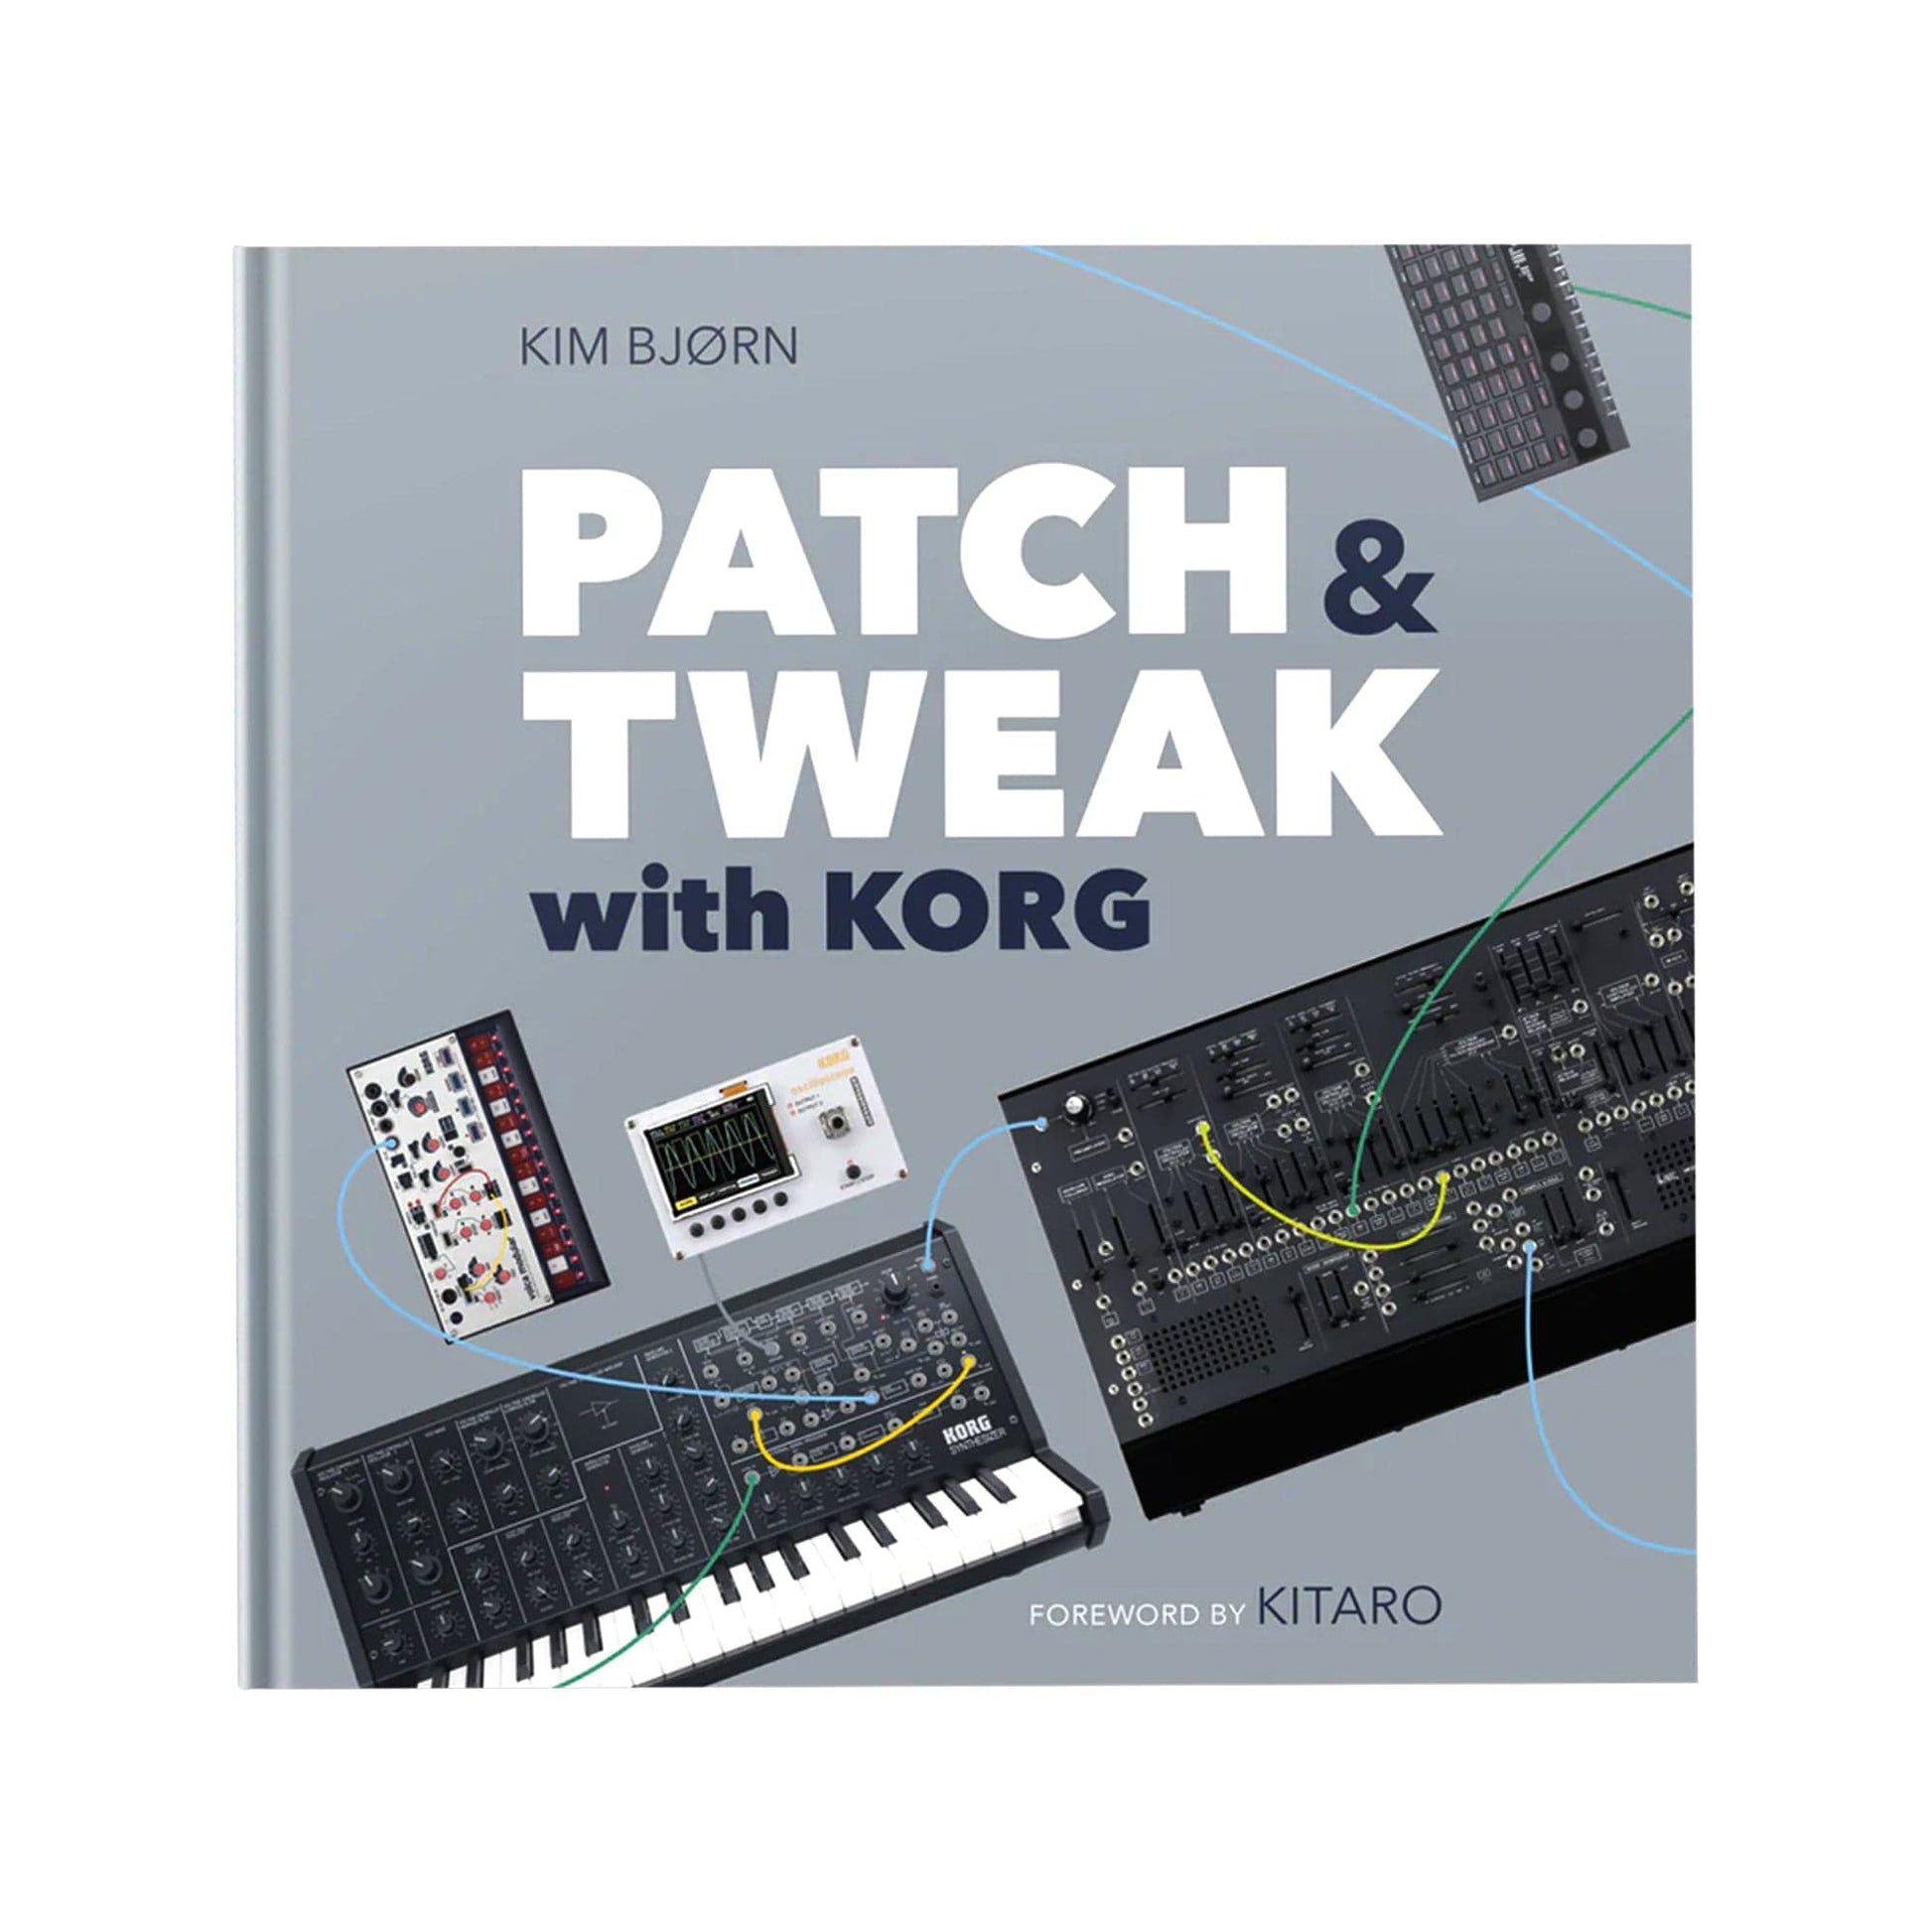 Patch & Tweak with KORG Book Accessories / Books and DVDs